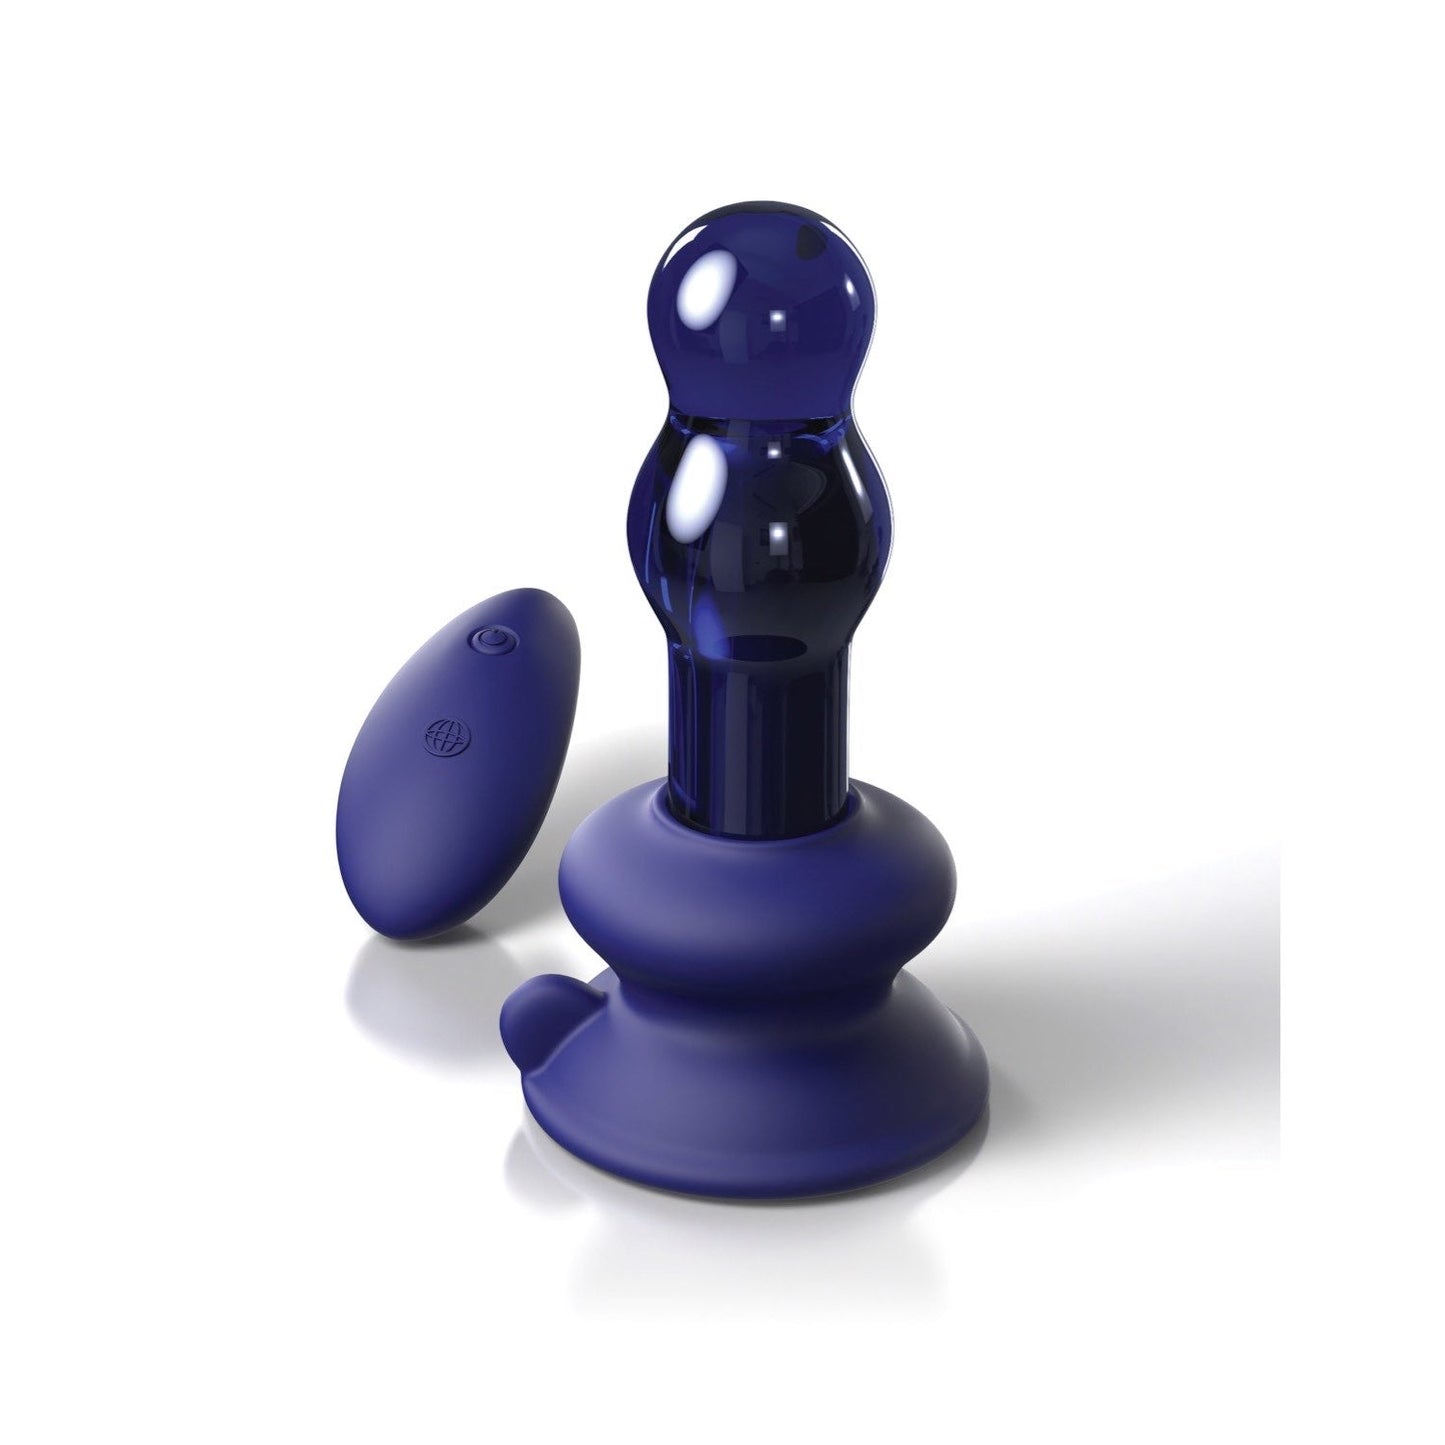 No. 83 - Blue Glass USB Rechargeable Vibrating Butt Plug with Remote